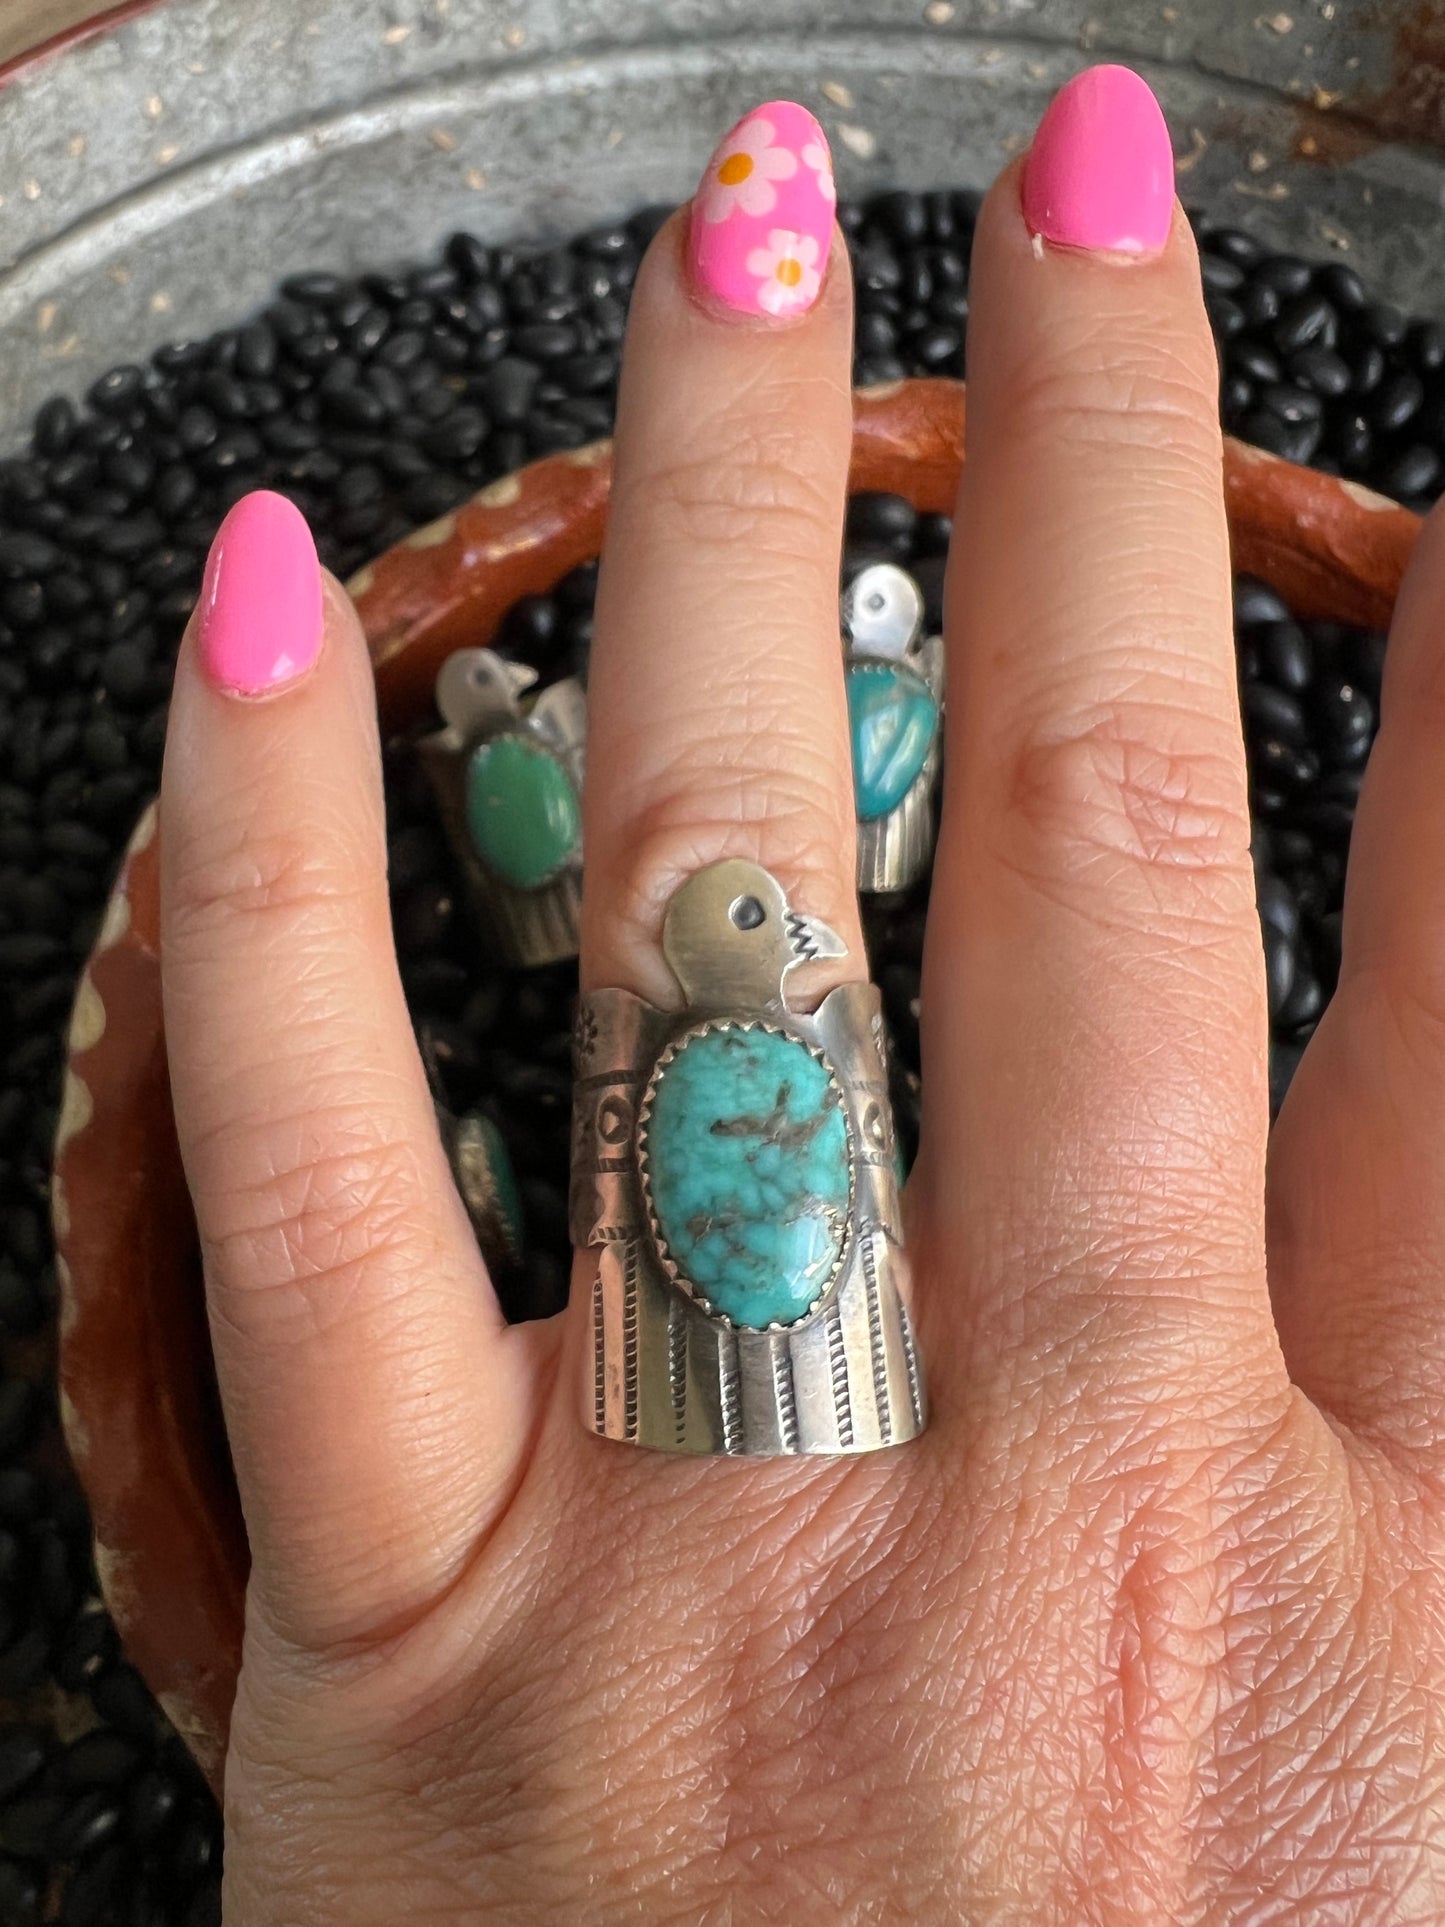 Hand stamped Turquoise thunderbird ring